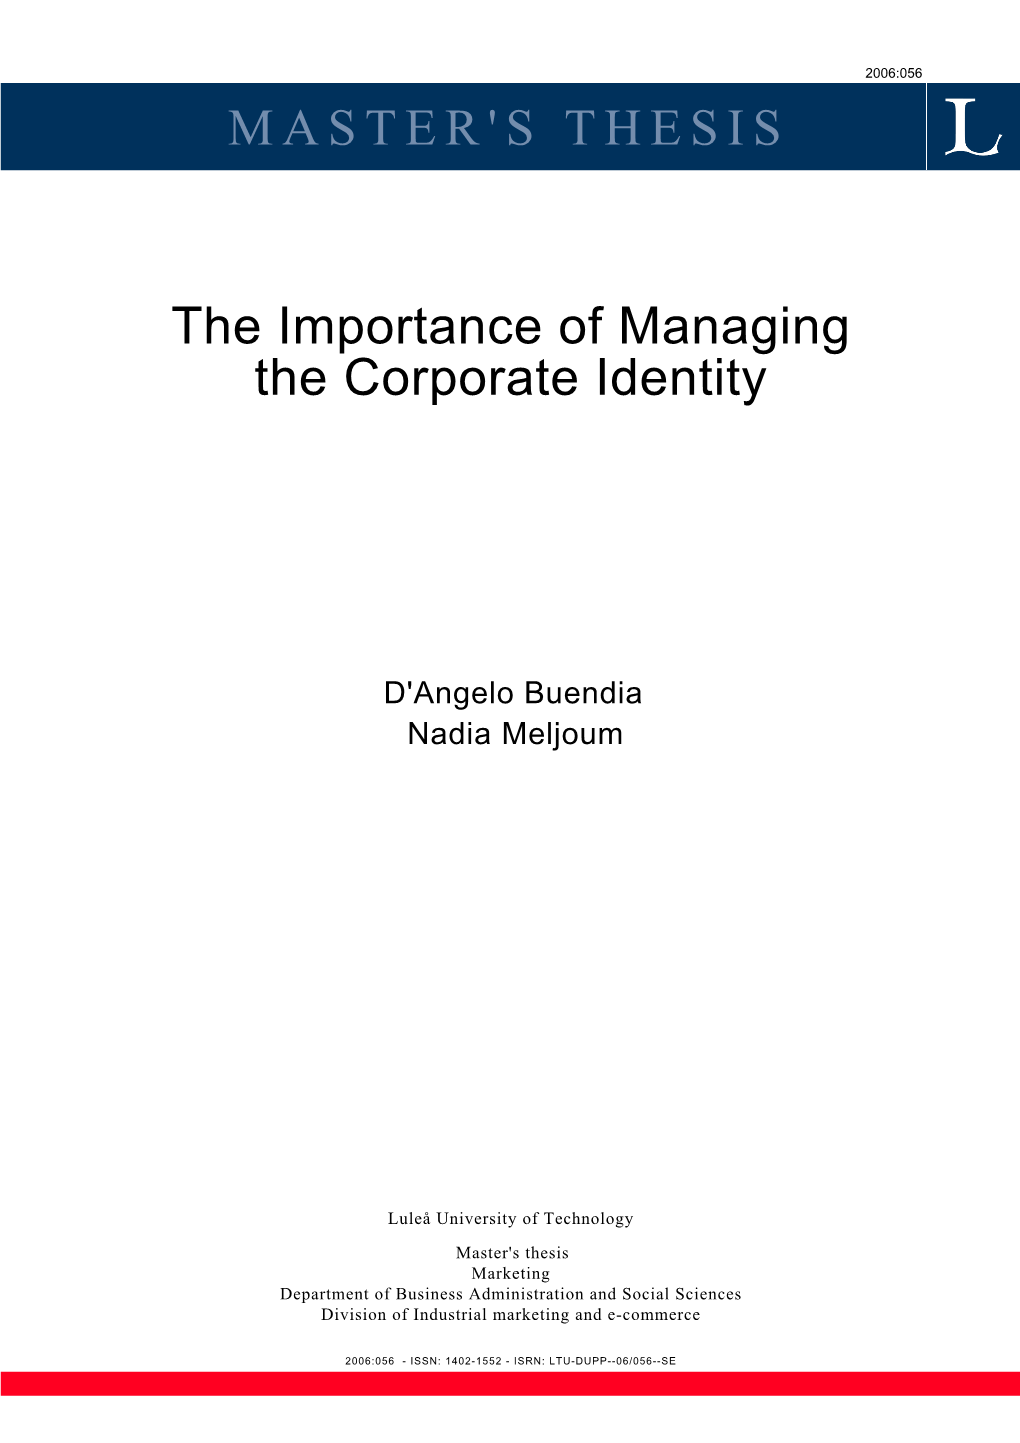 The Importance of Managing the Corporate Identity